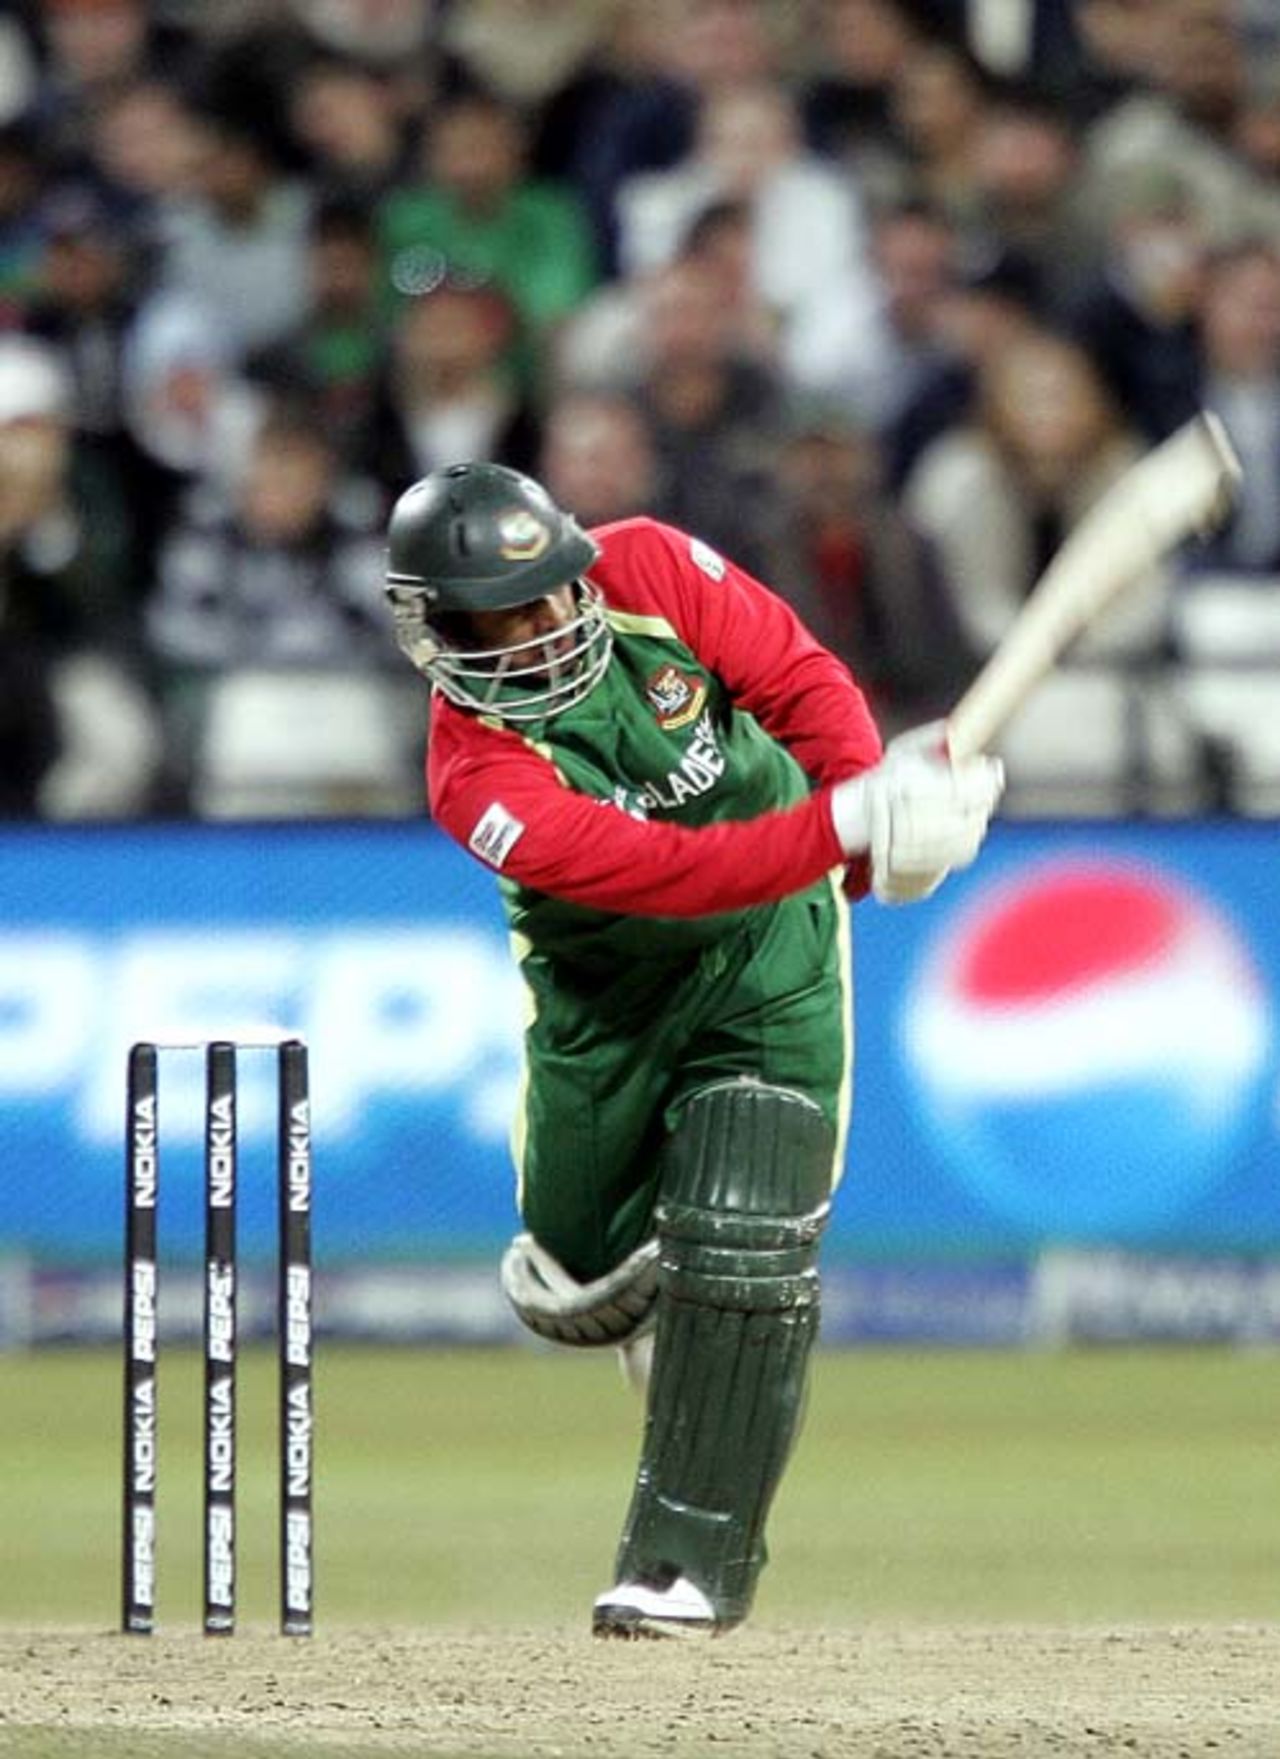 While the other batsmen went for the big shots, Alok Kapali made a patient 35-ball 14, South Africa v Bangladesh, Group A, ICC World Twenty20, Cape Town, September 15, 2007 